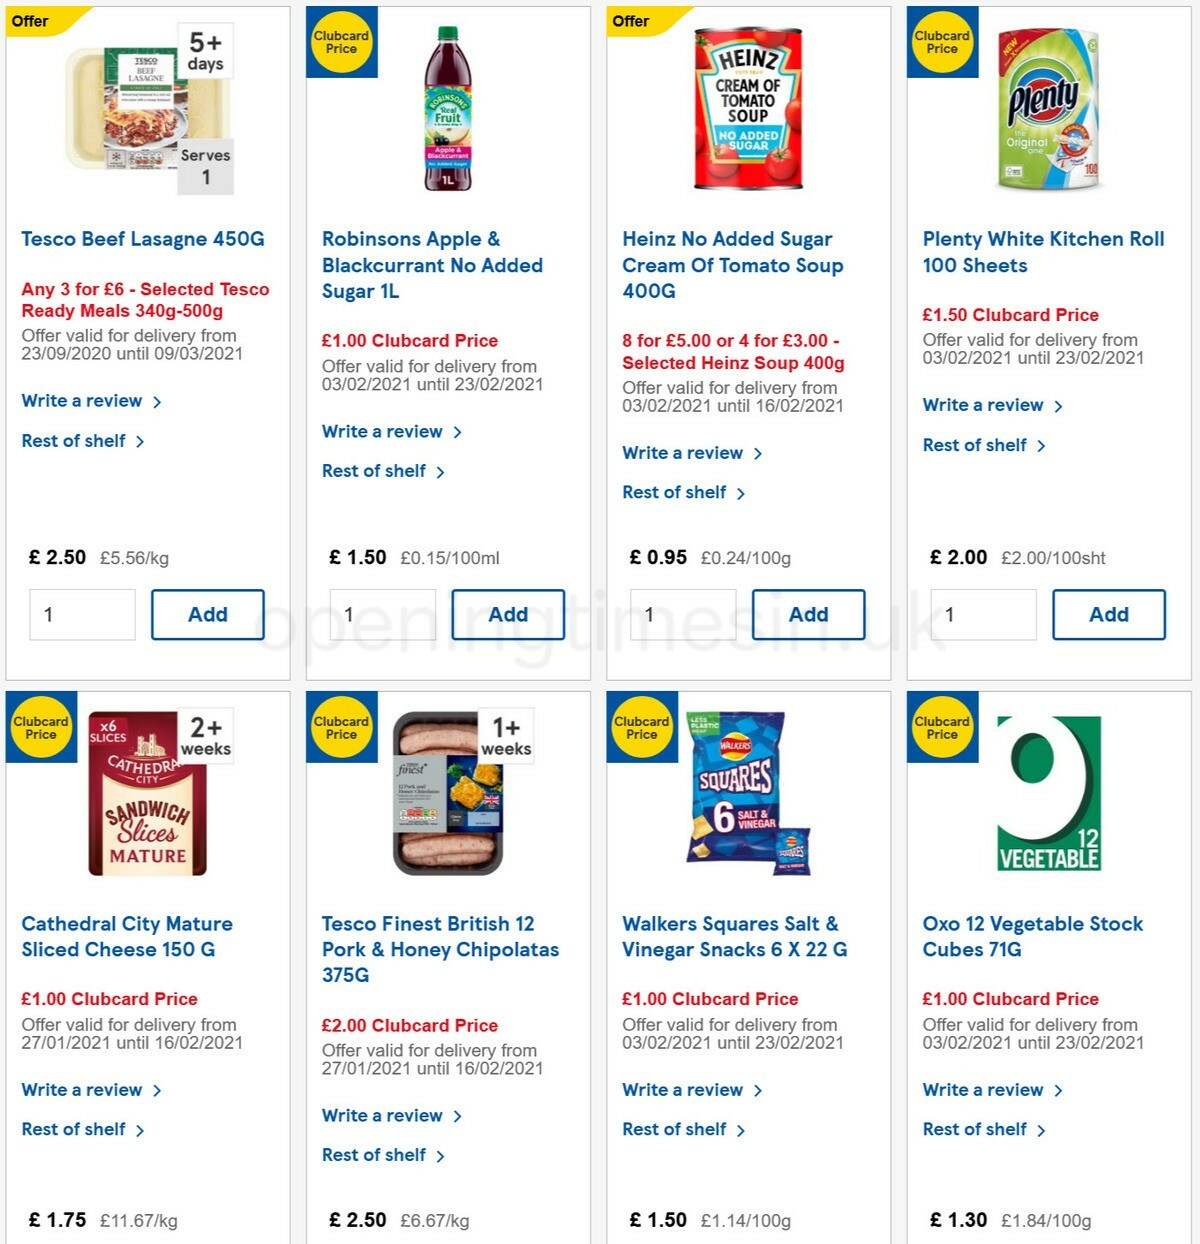 TESCO Offers from 10 February